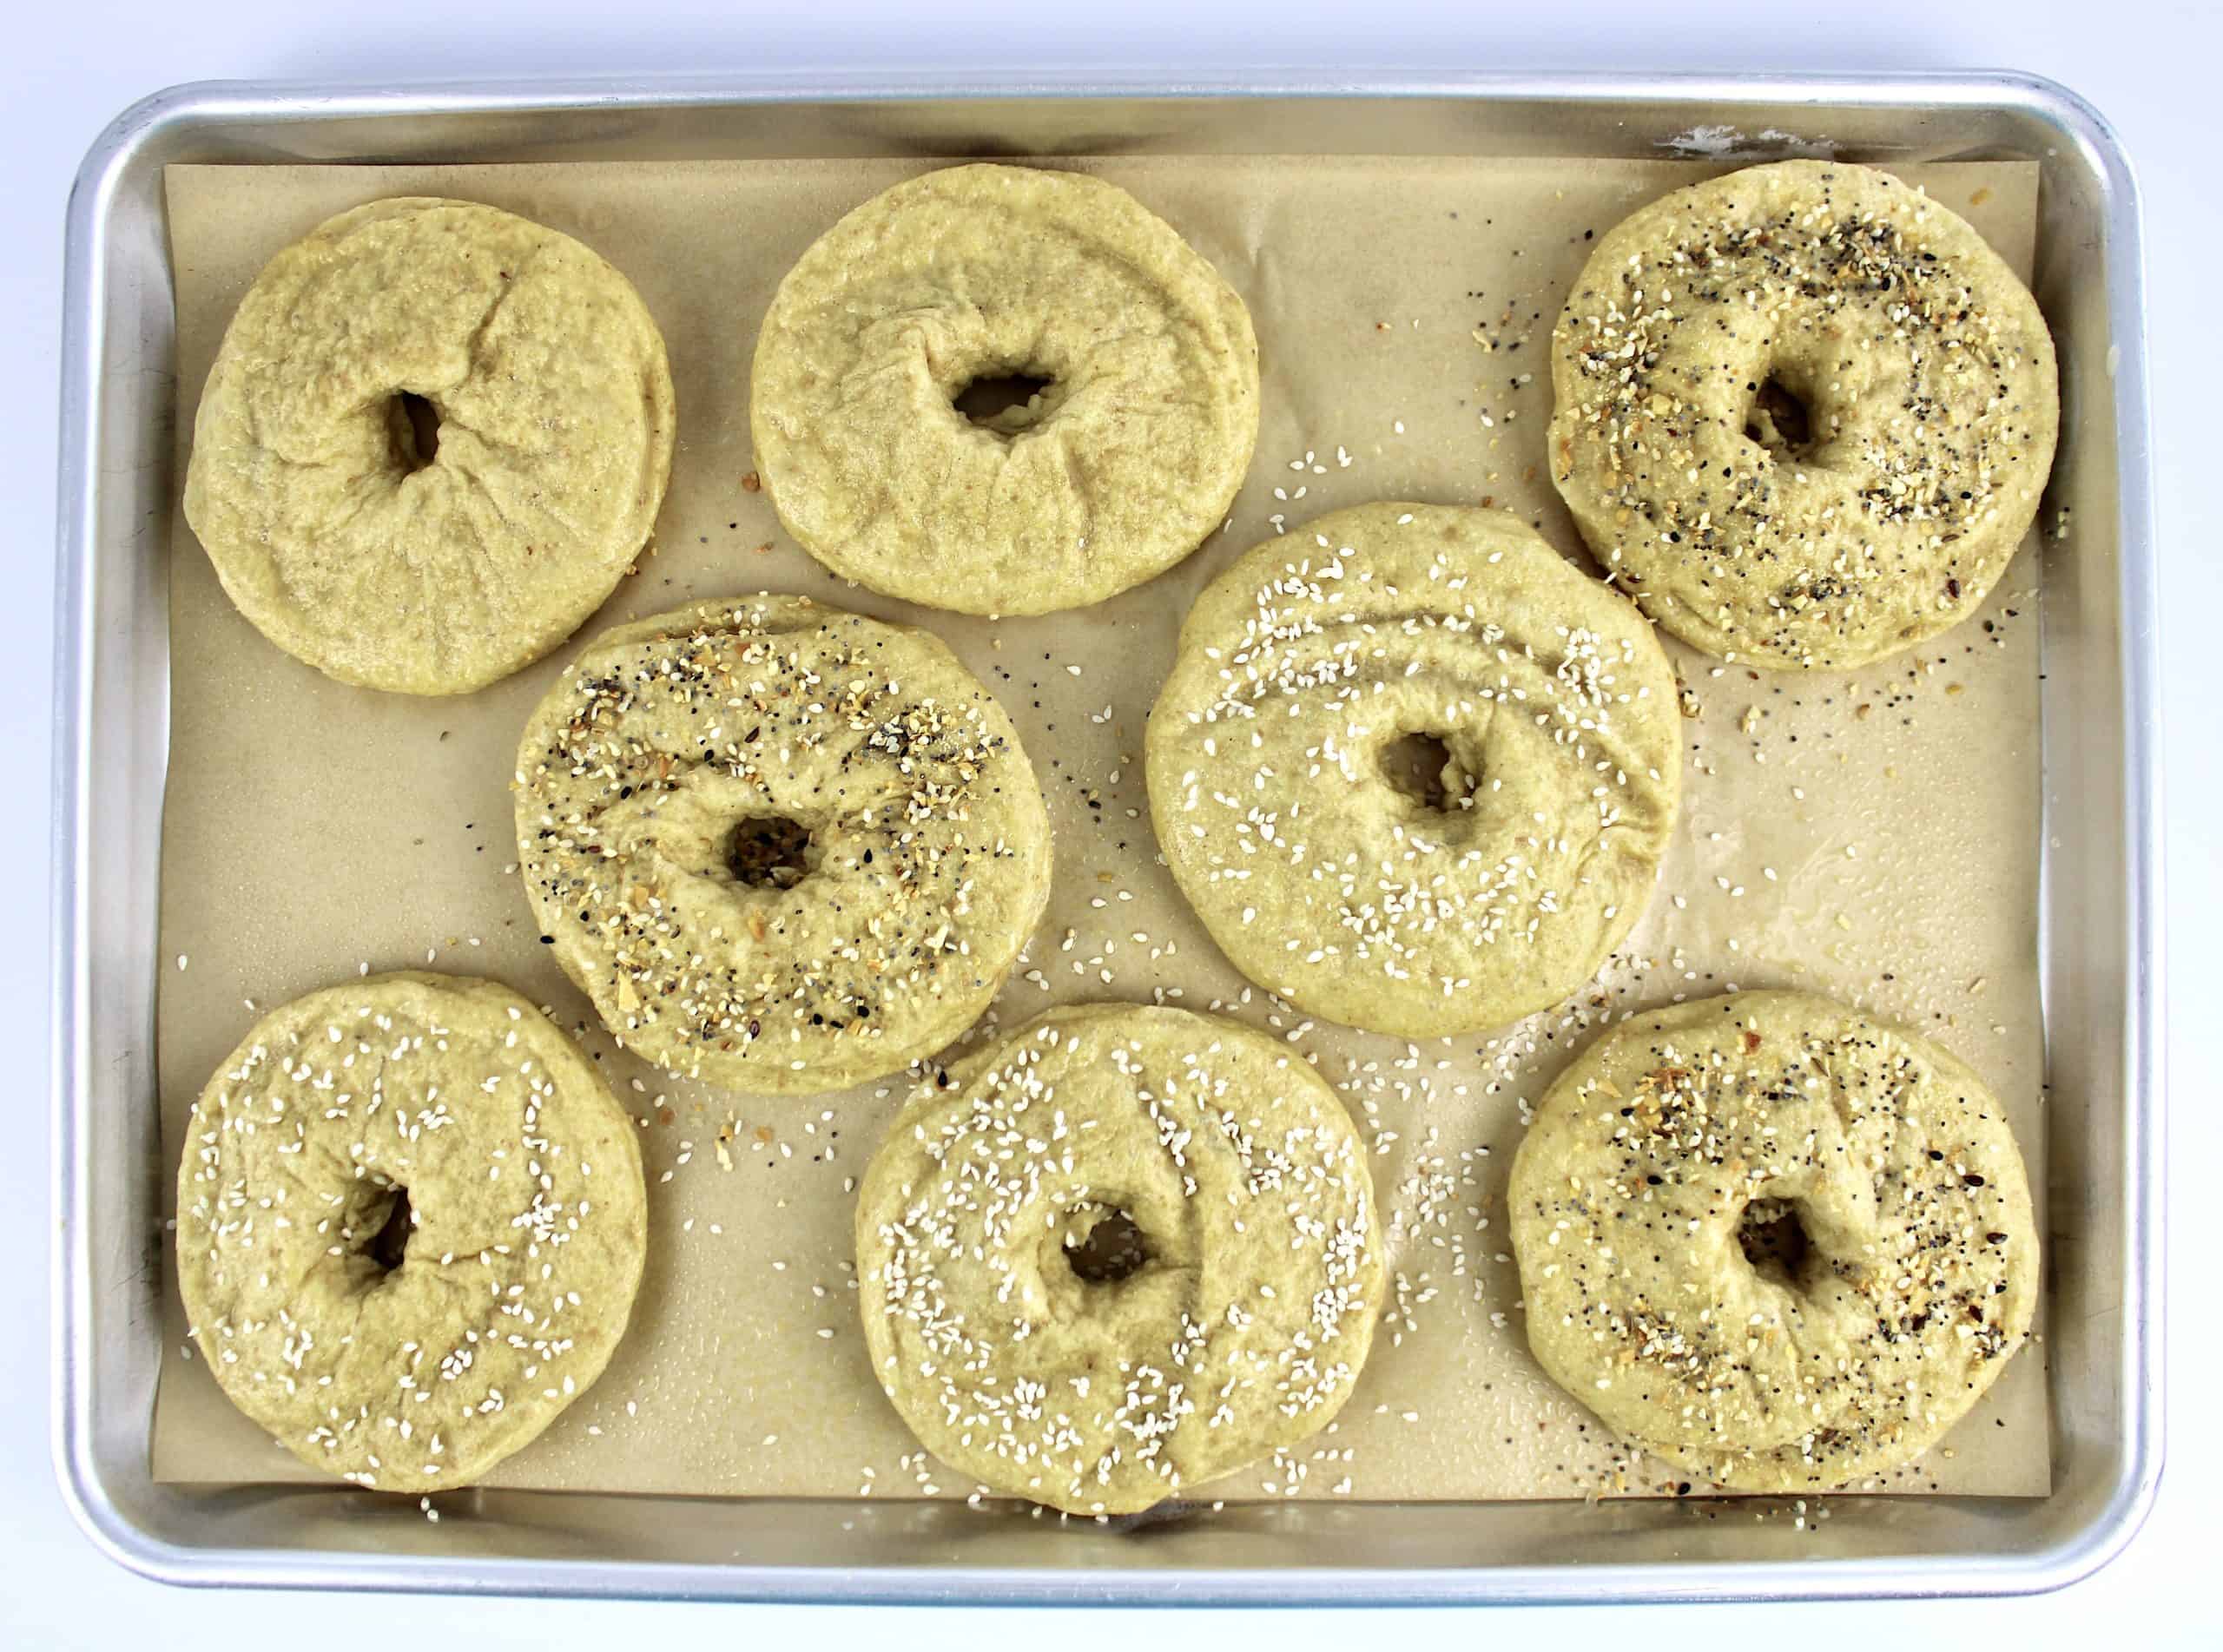 8 bagels unbaked on parchment lined baking sheet